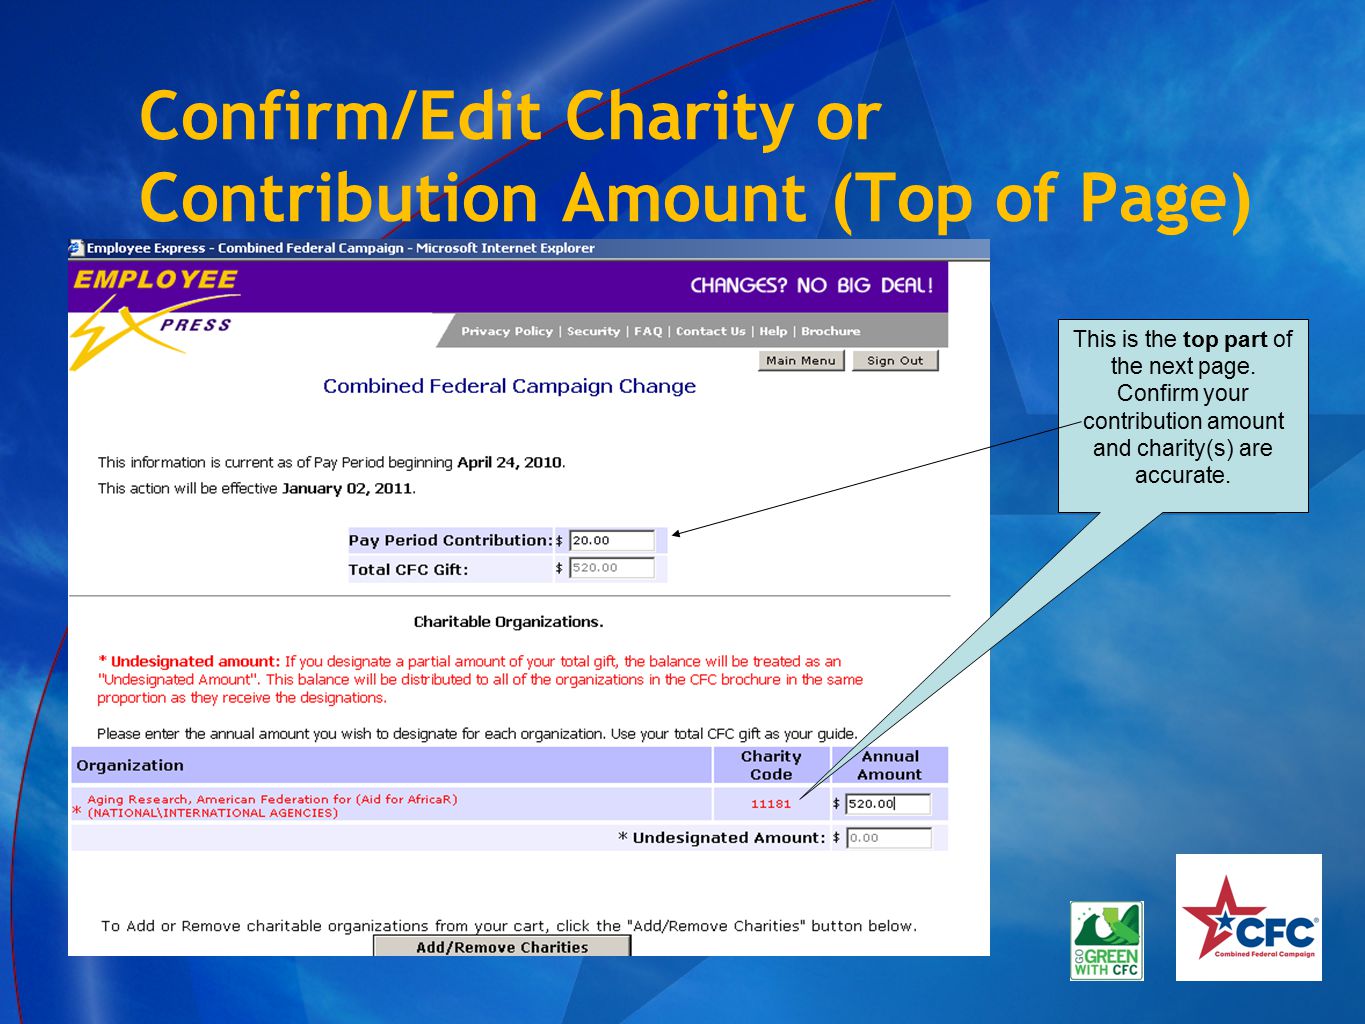 Confirm/Edit Charity or Contribution Amount (Top of Page) This is the top part of the next page.